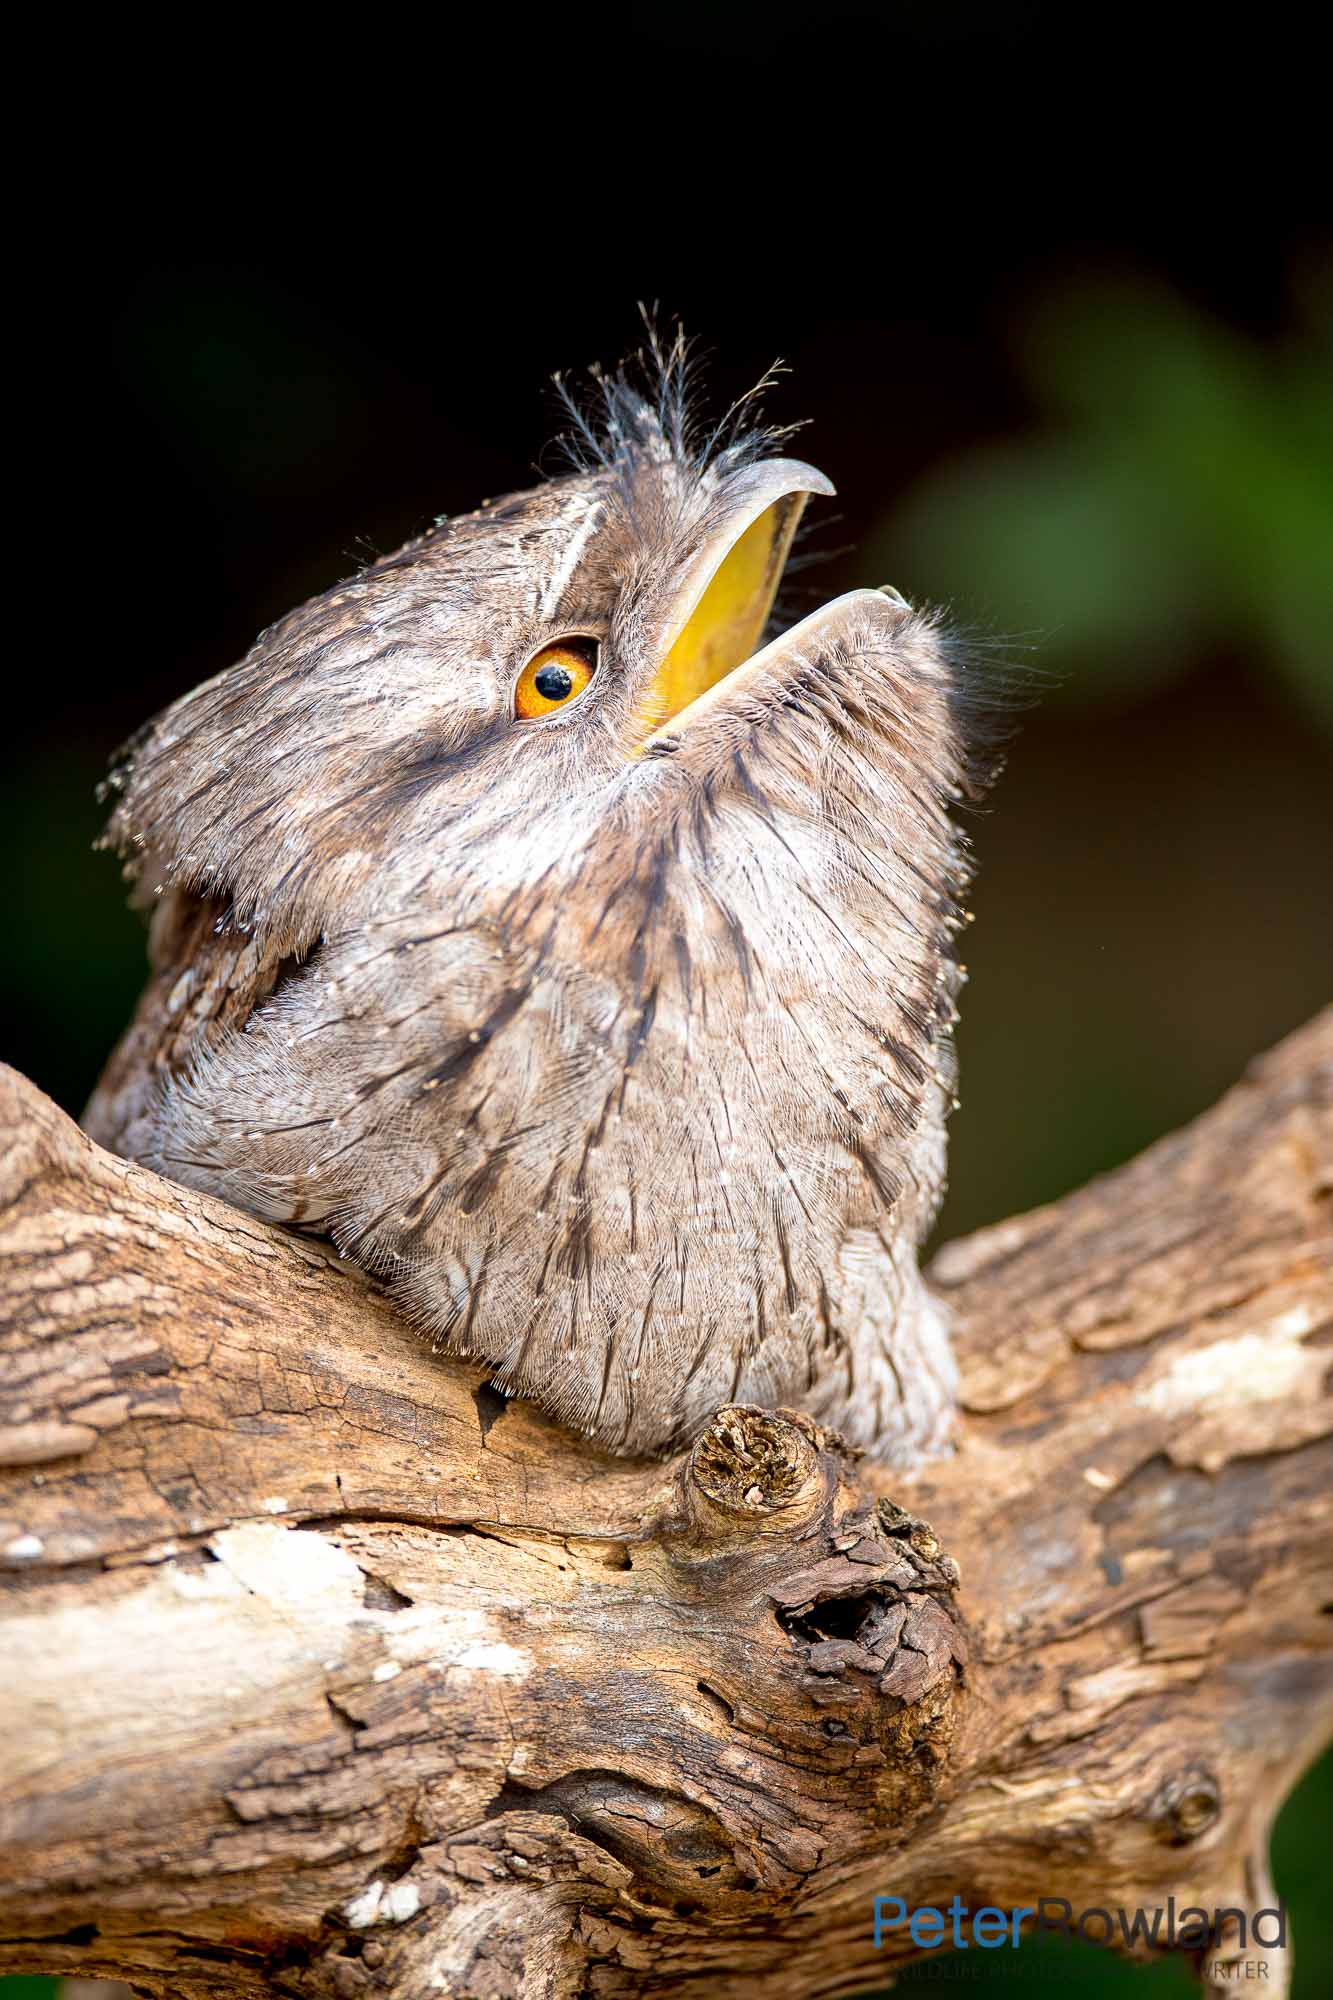 A Tawny Frogmouth sitting on a dead tree branch with its beak open